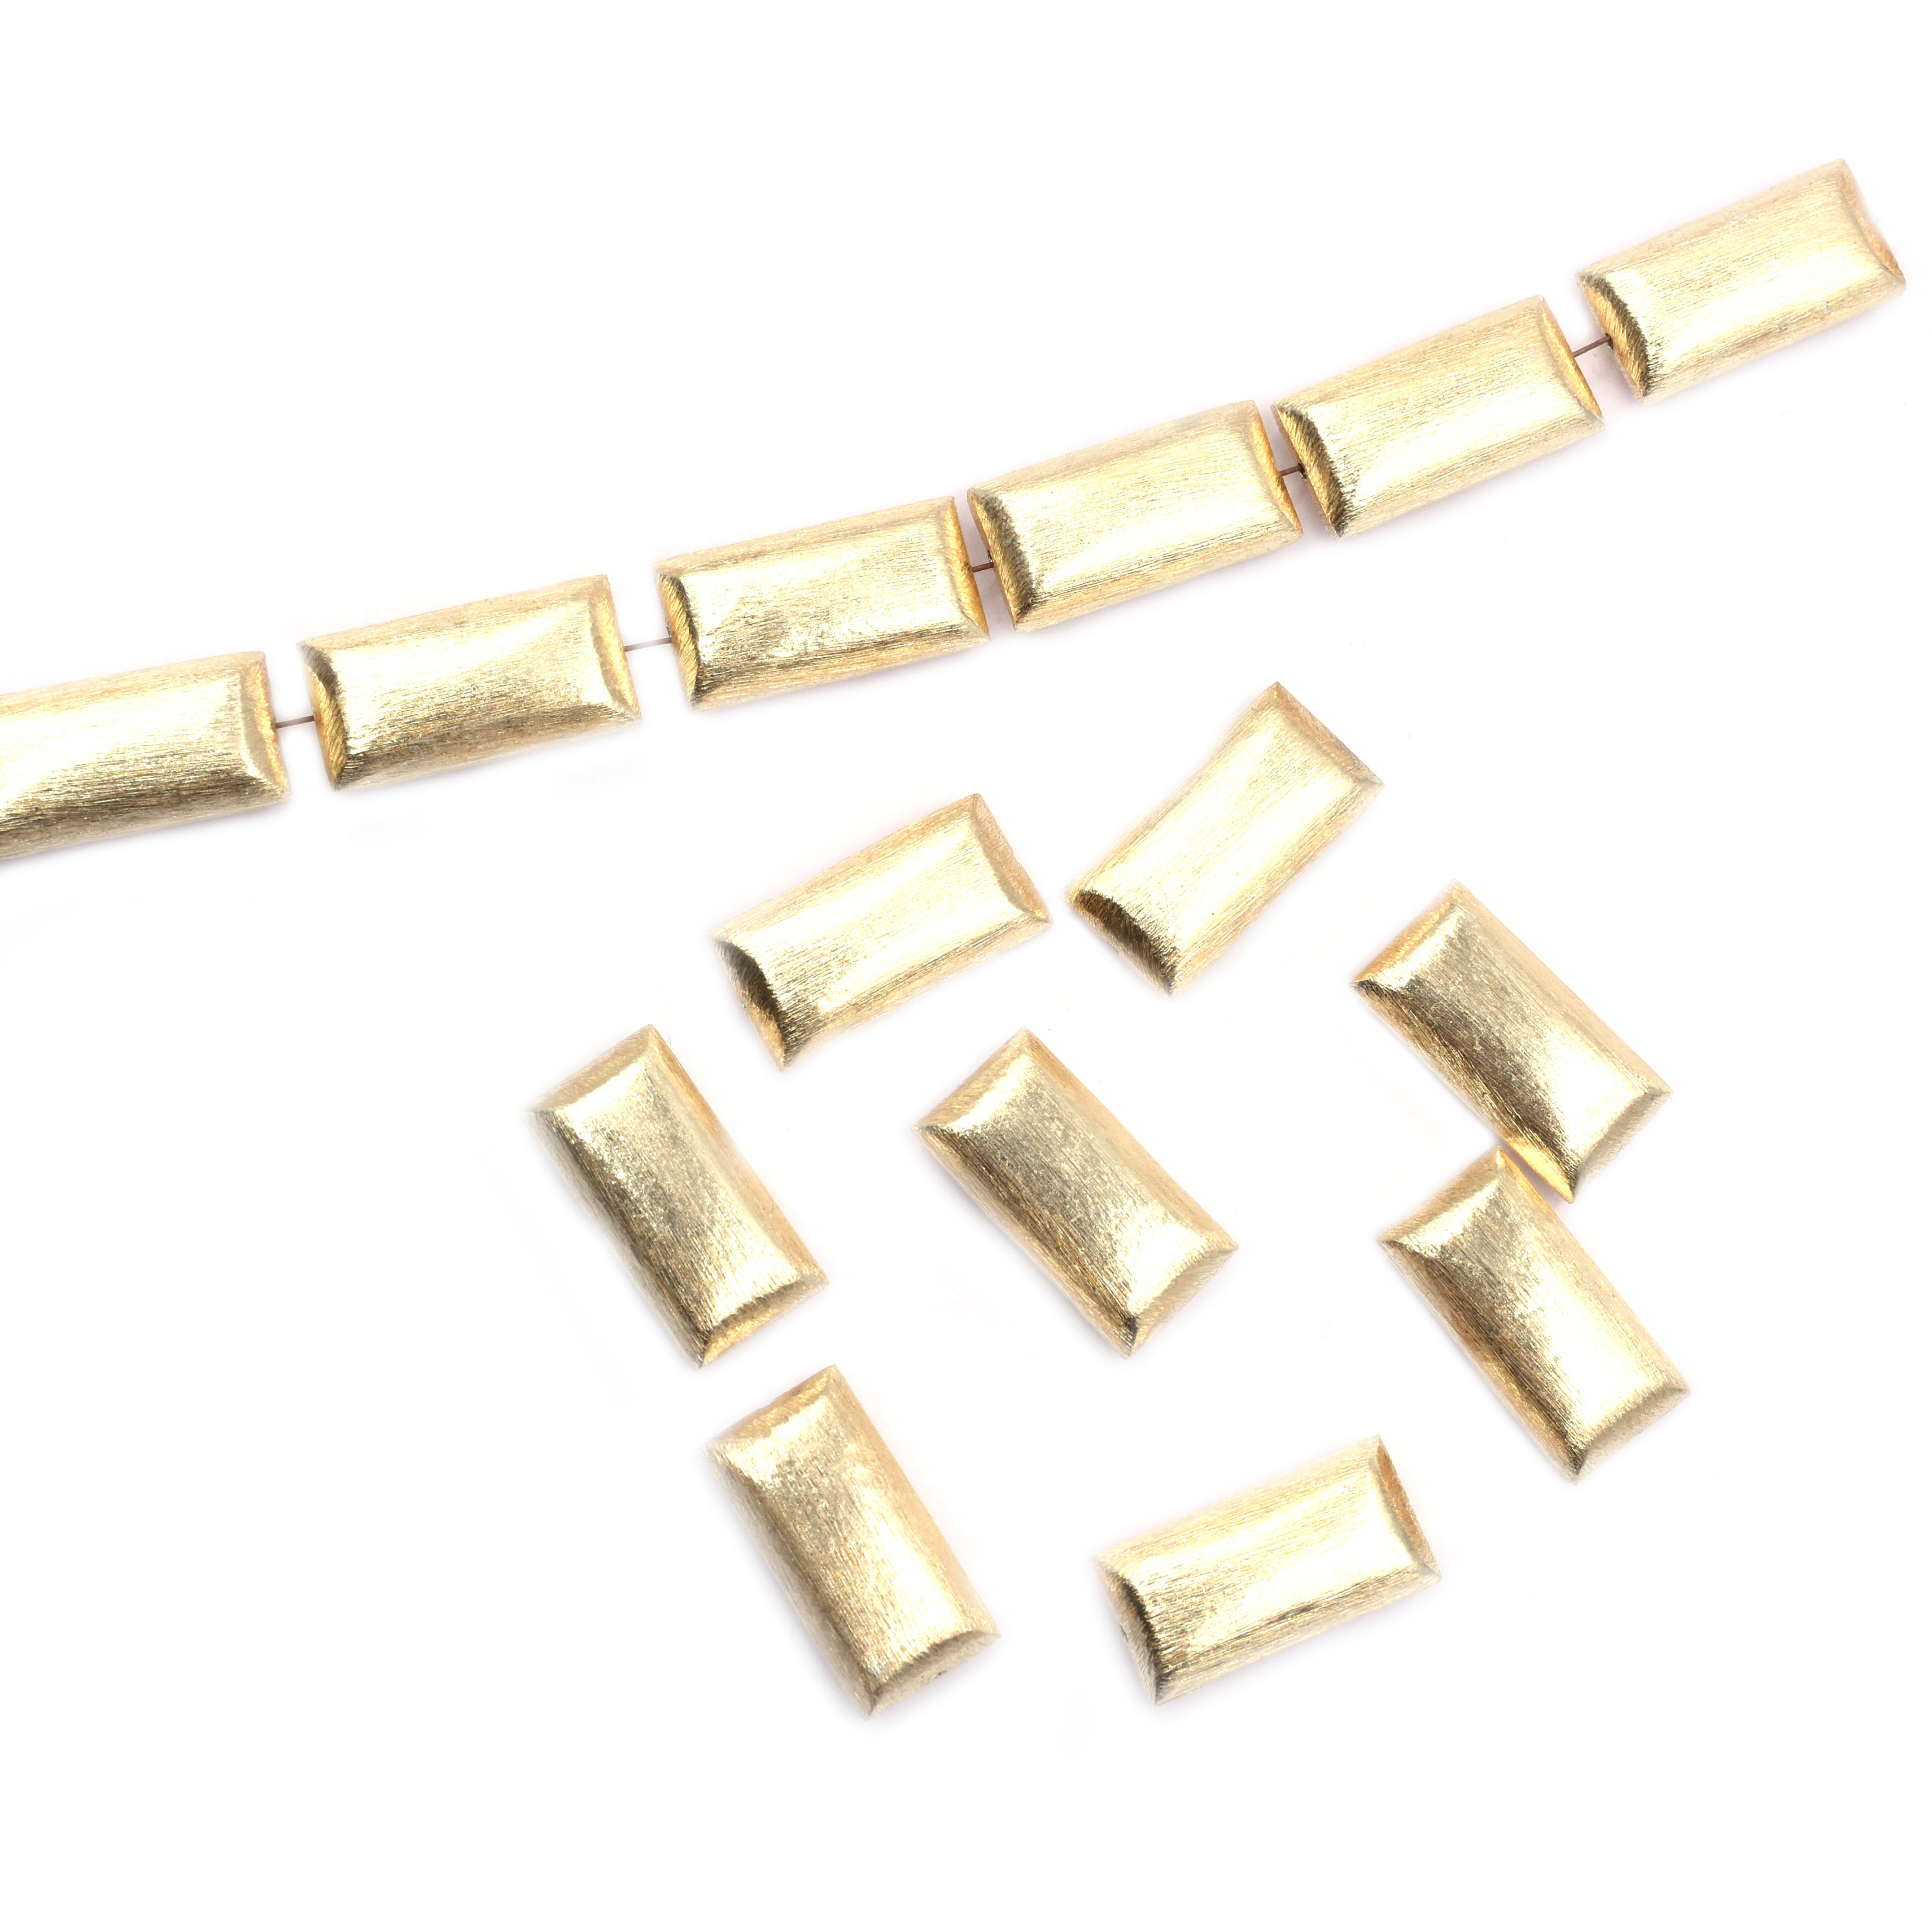 10 Pcs 24X12mm Biscuit Brushed Matte Finish Beads Gold Plated Copper